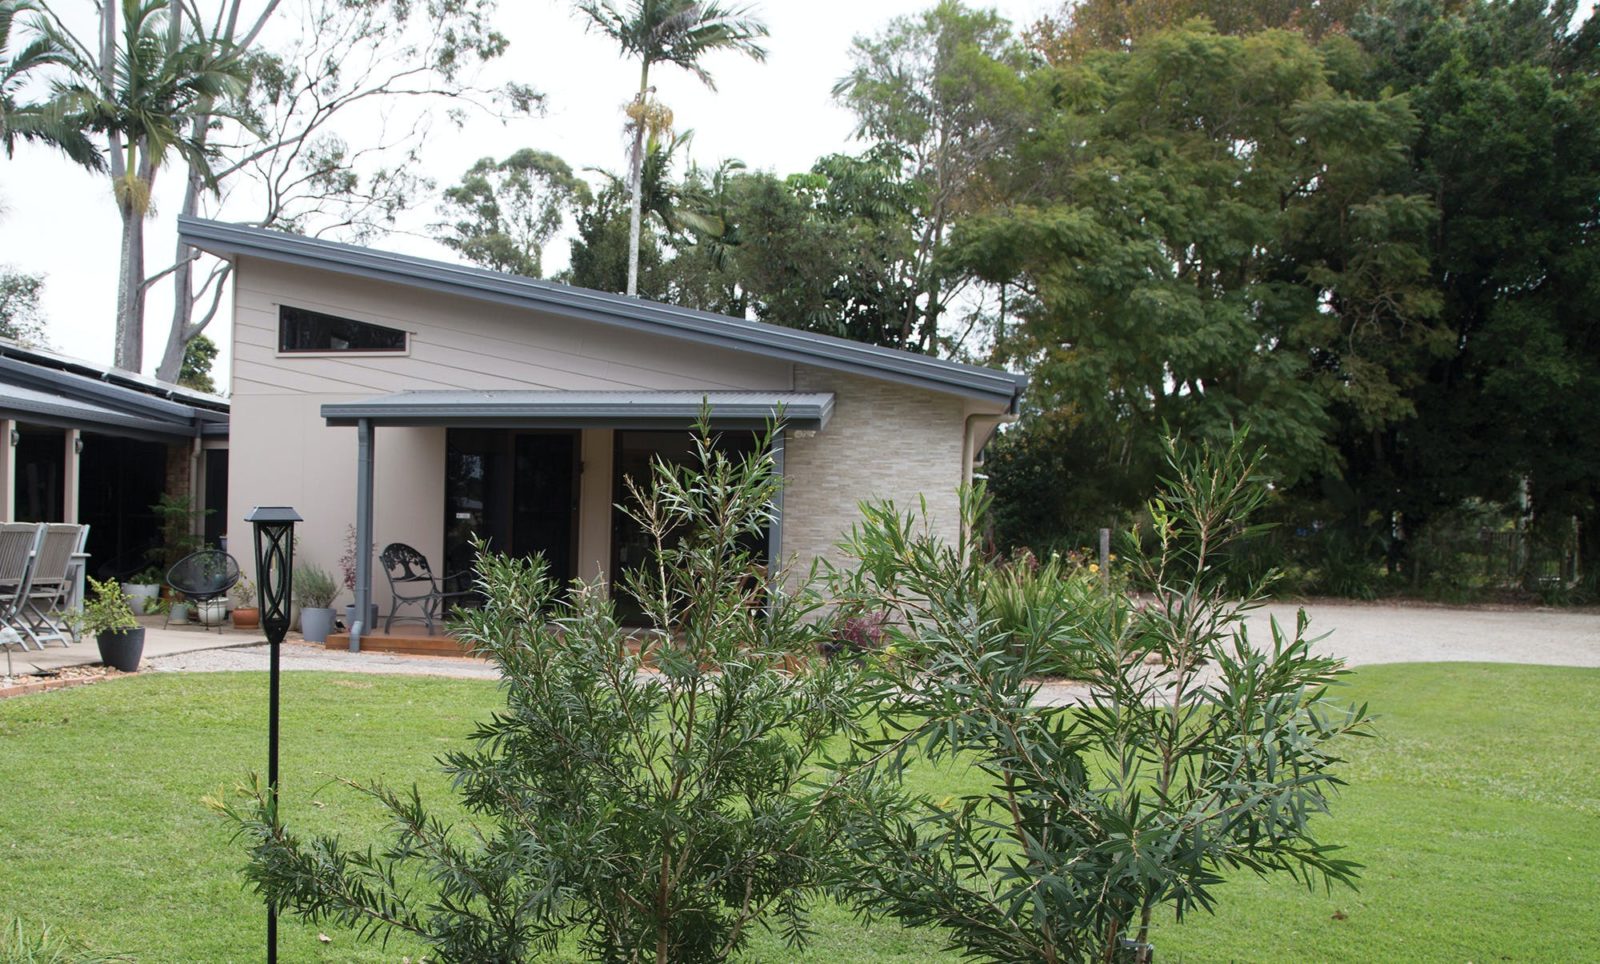 Studio Art Gallery on a tranquil acre at Bribie Pines Estate Ningi Qld